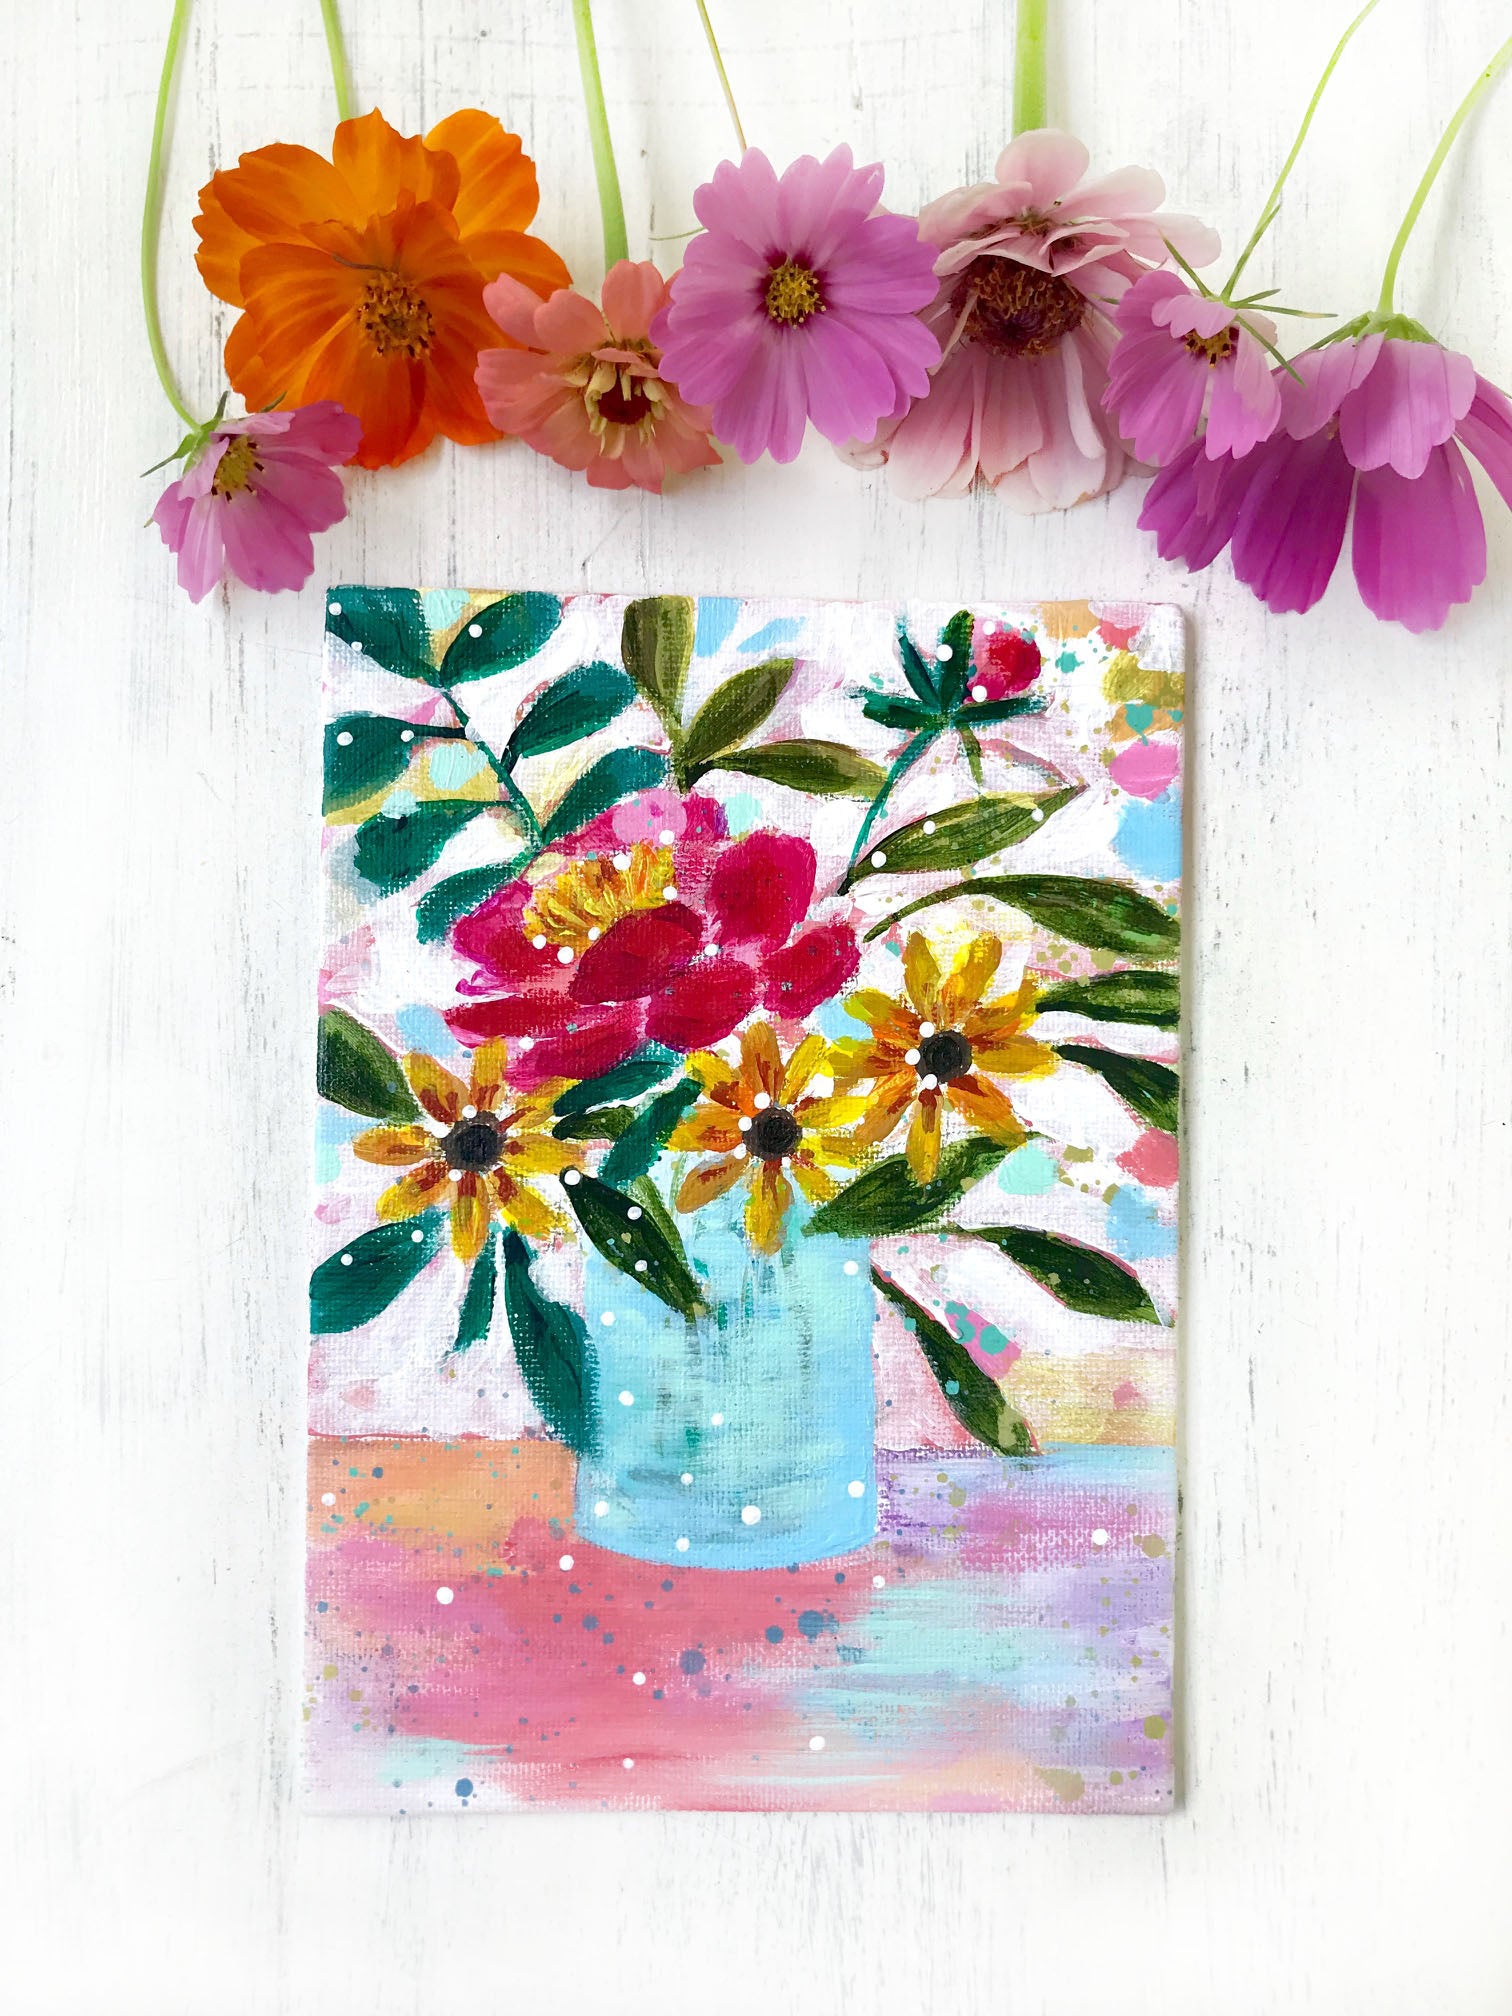 August Daily Painting Day 18 “Sweeter than Honey" 5x7 inch Floral Original - Bethany Joy Art